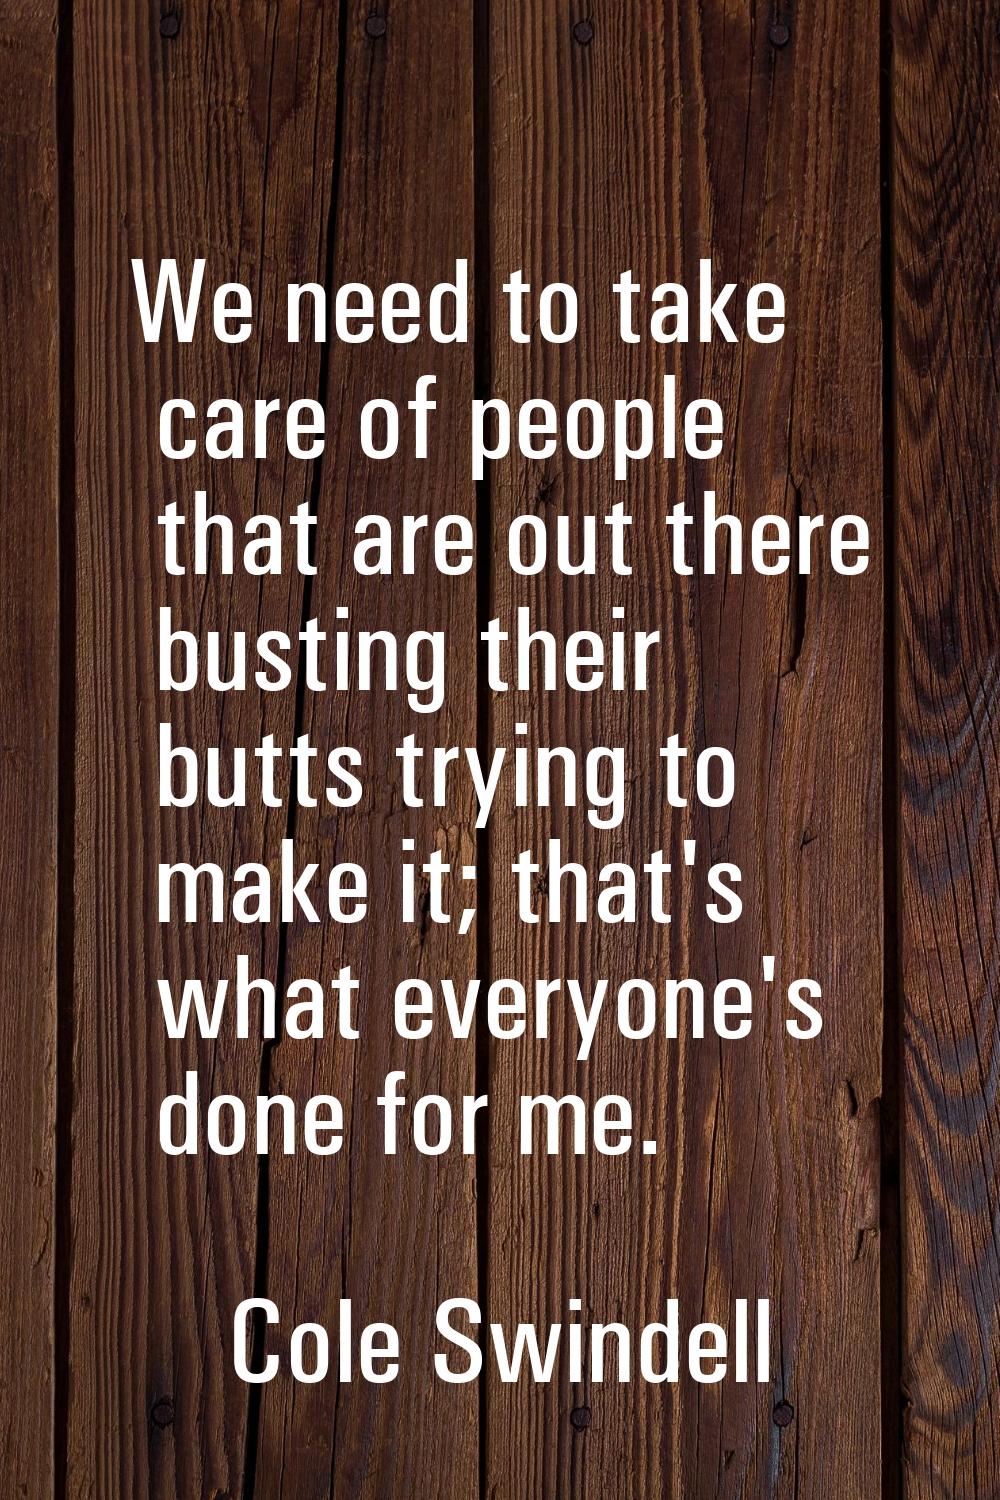 We need to take care of people that are out there busting their butts trying to make it; that's wha